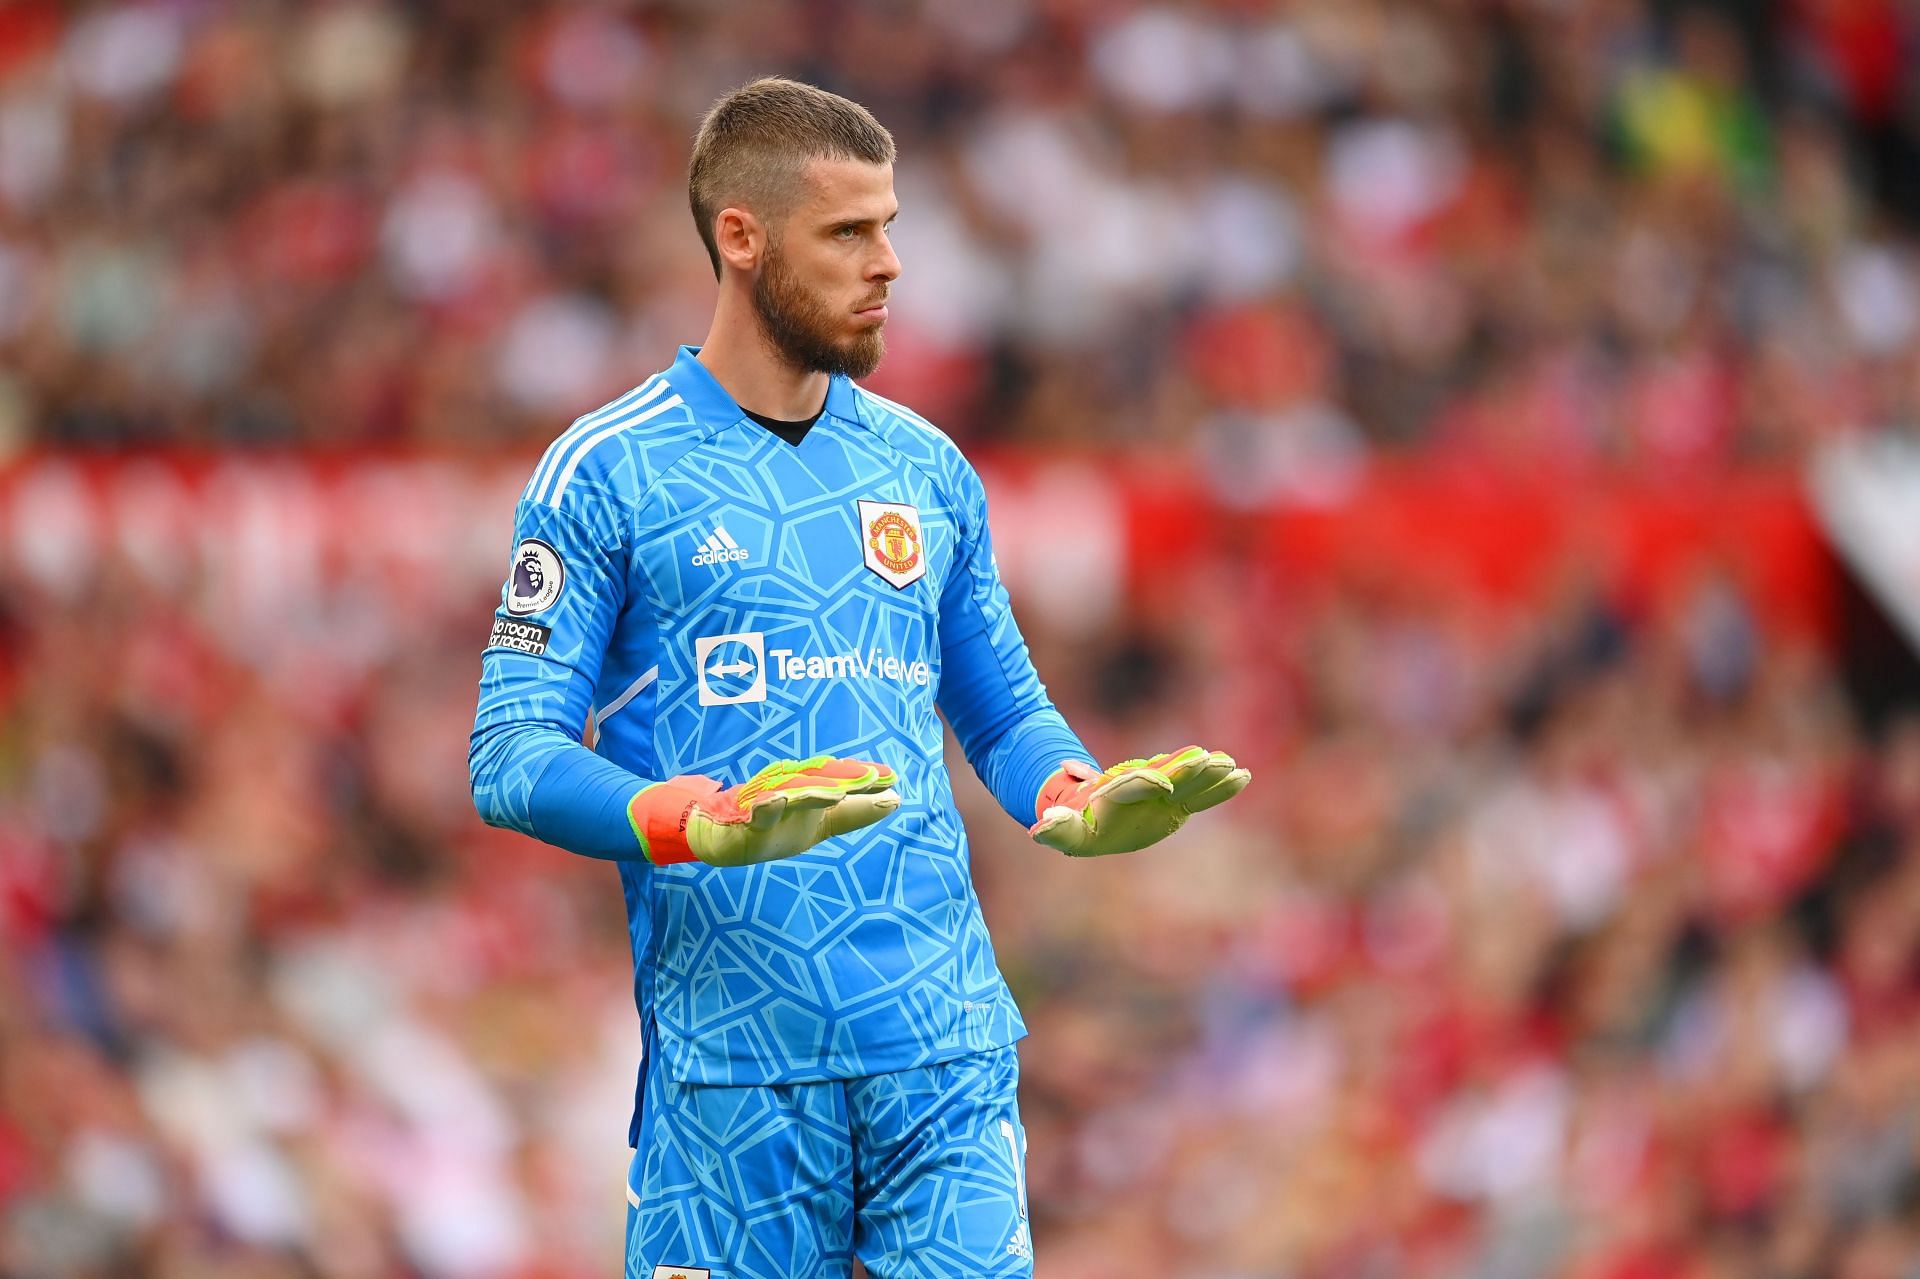 De Gea remains United's first-choice keeper